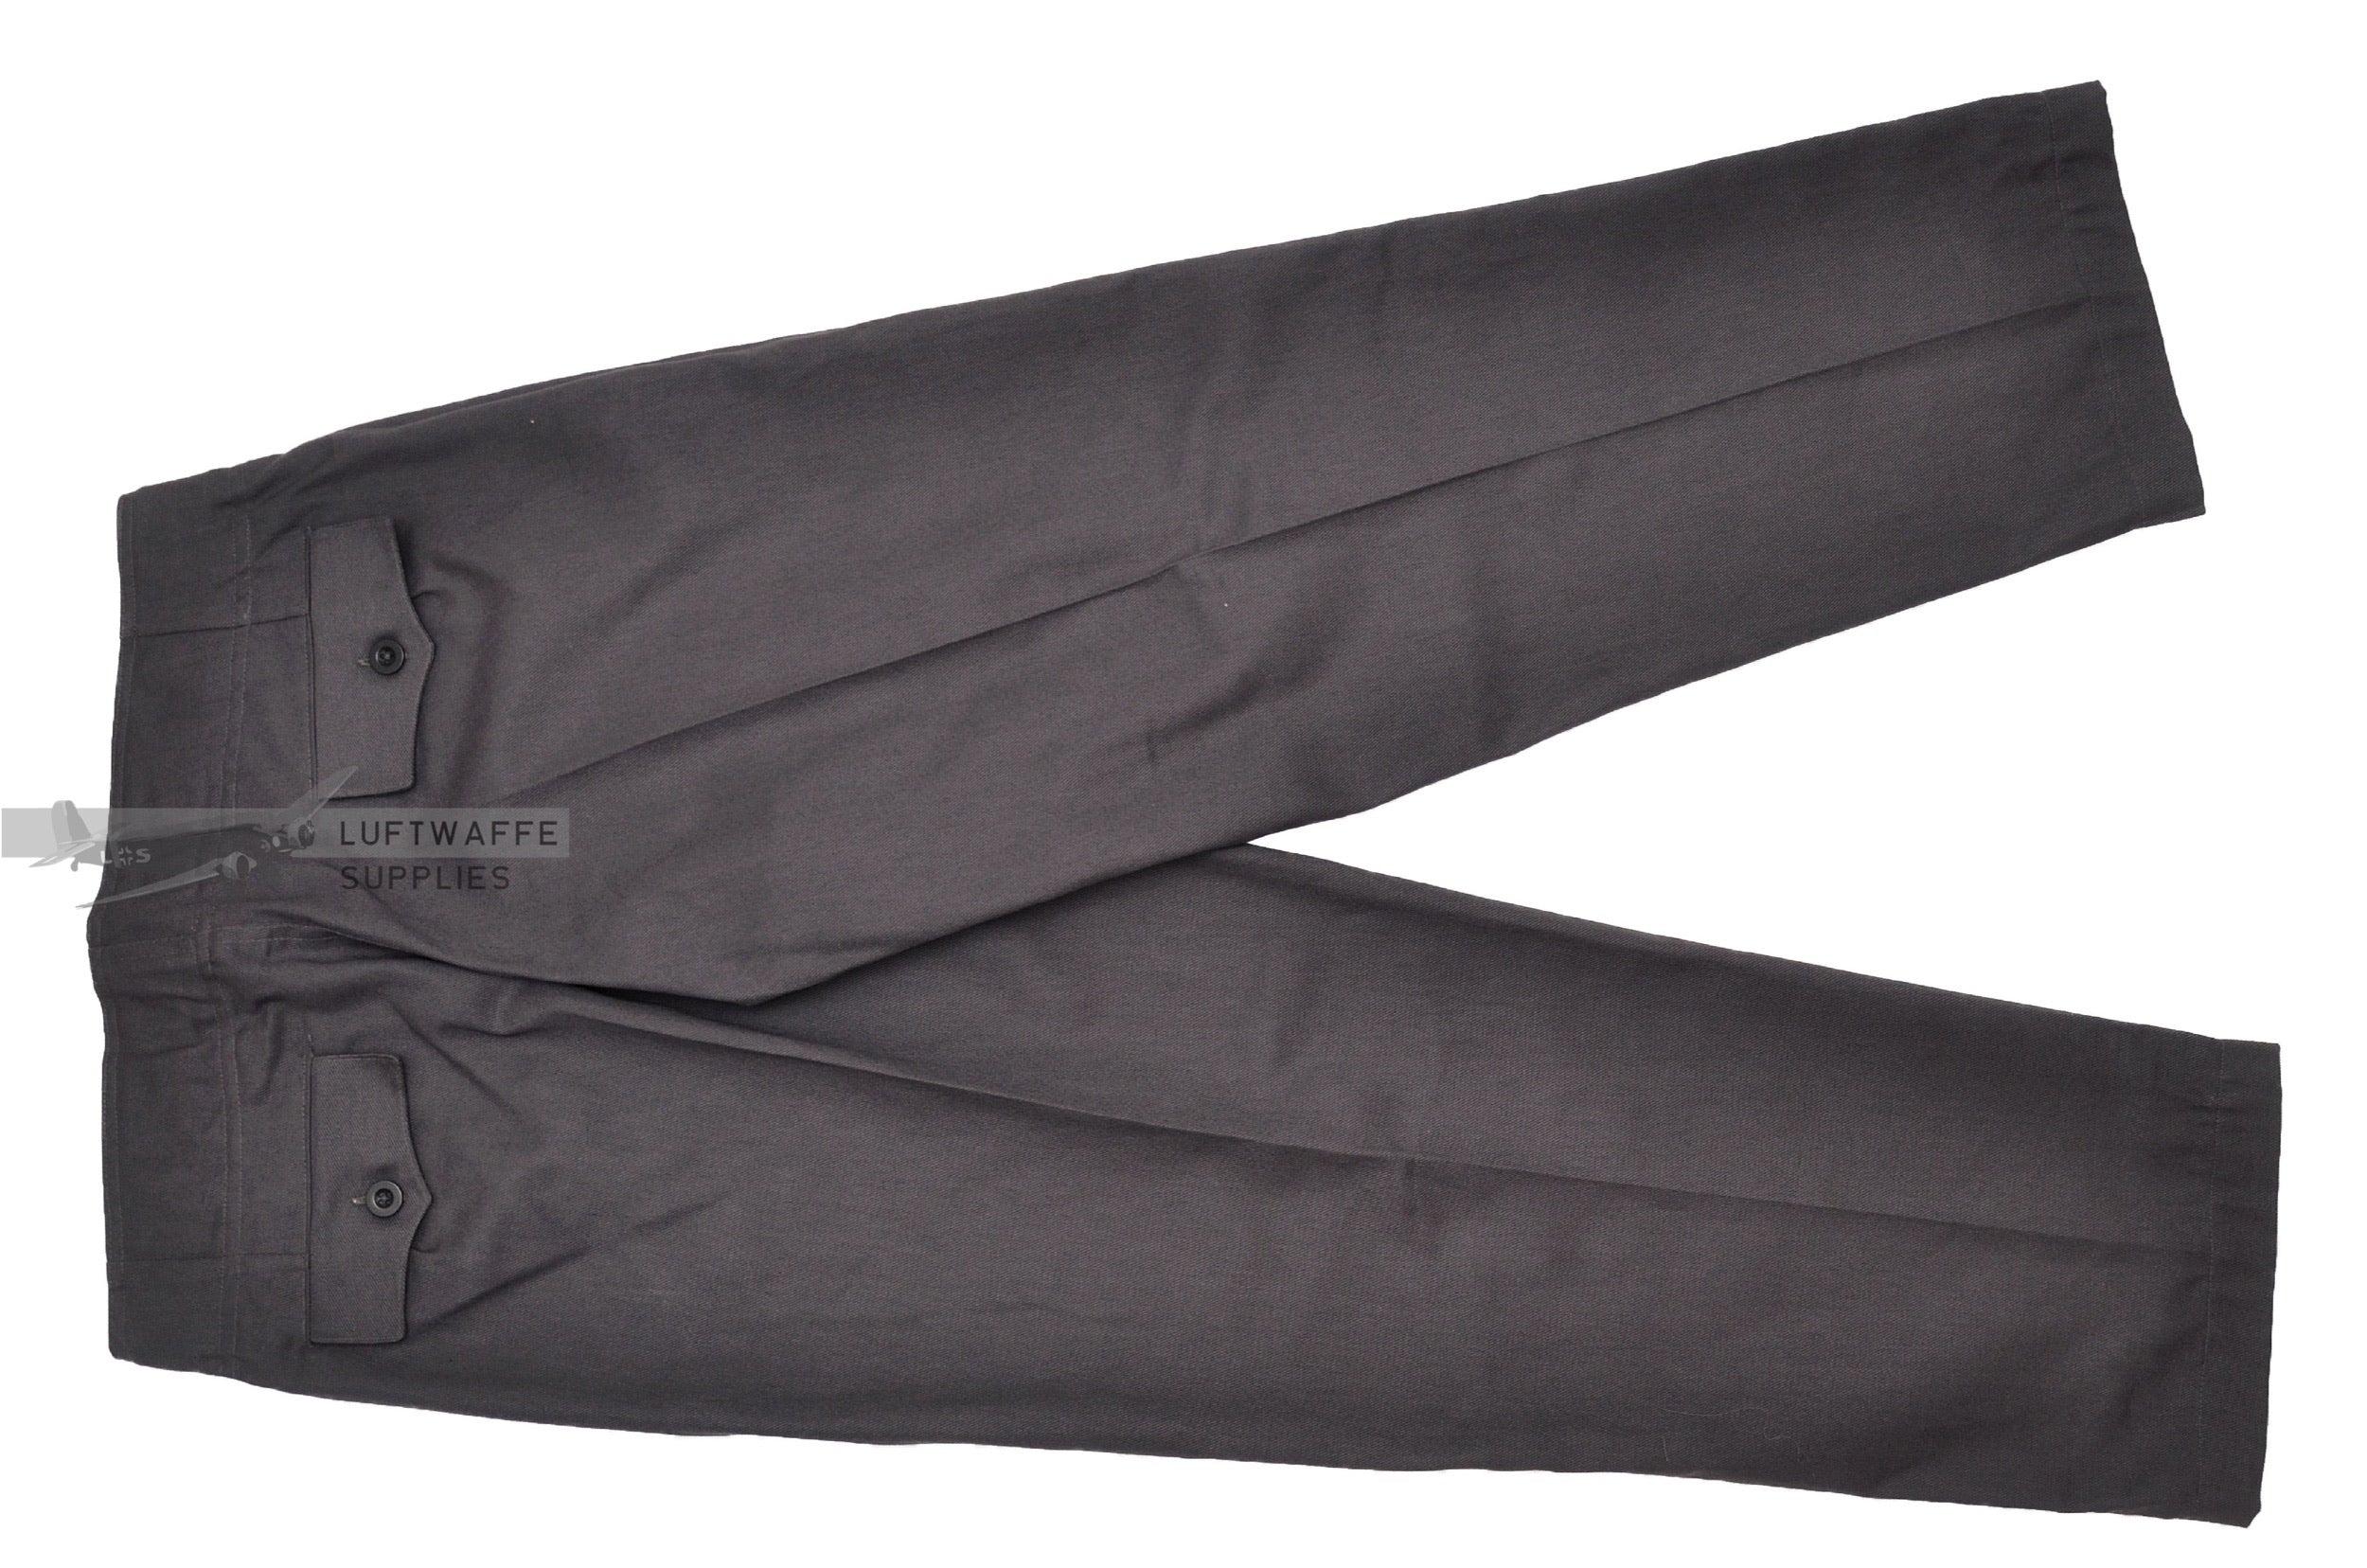 Mens Trousers In Bhopal, Madhya Pradesh At Best Price | Mens Trousers  Manufacturers, Suppliers In Bhopal